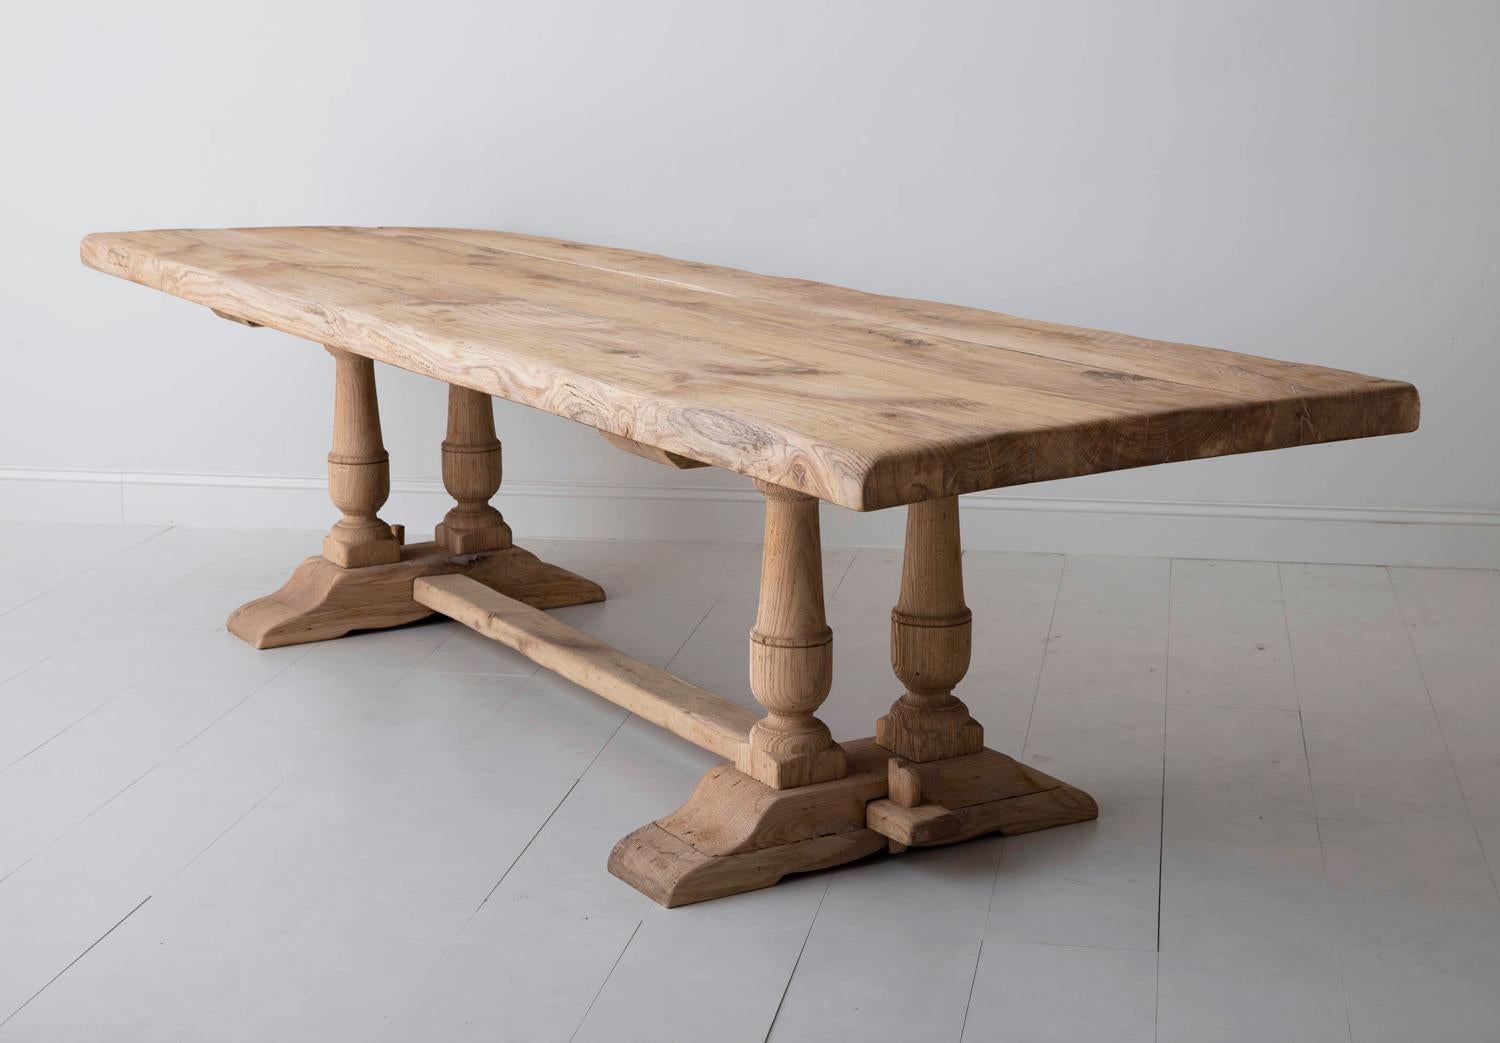 A grand-scale, sturdy French oak trestle dining table, circa 1880, with a soft, honey-colored bleached patina. This table came from a maison de maître (master's house) in Montpellier, France. It has a beautiful plank top that is 2.63 inches thick;